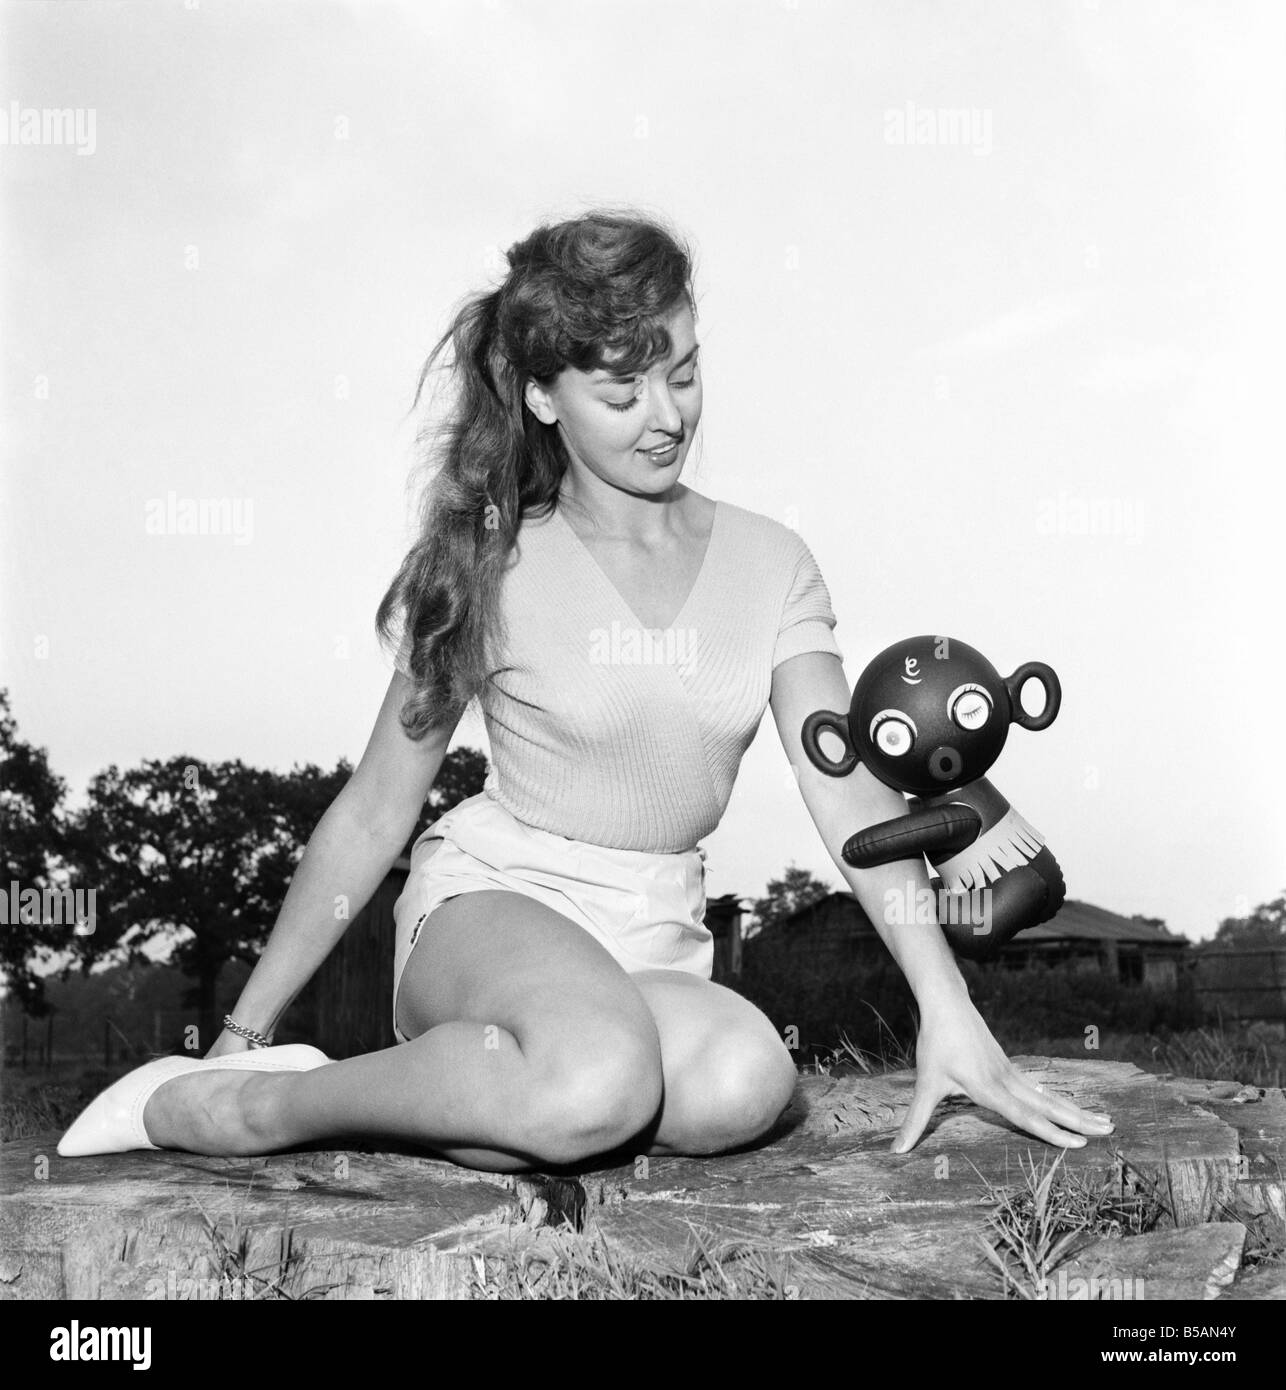 Model Kim Pearson seen here with inflatable alien toys. 1962 E422-003 Stock Photo